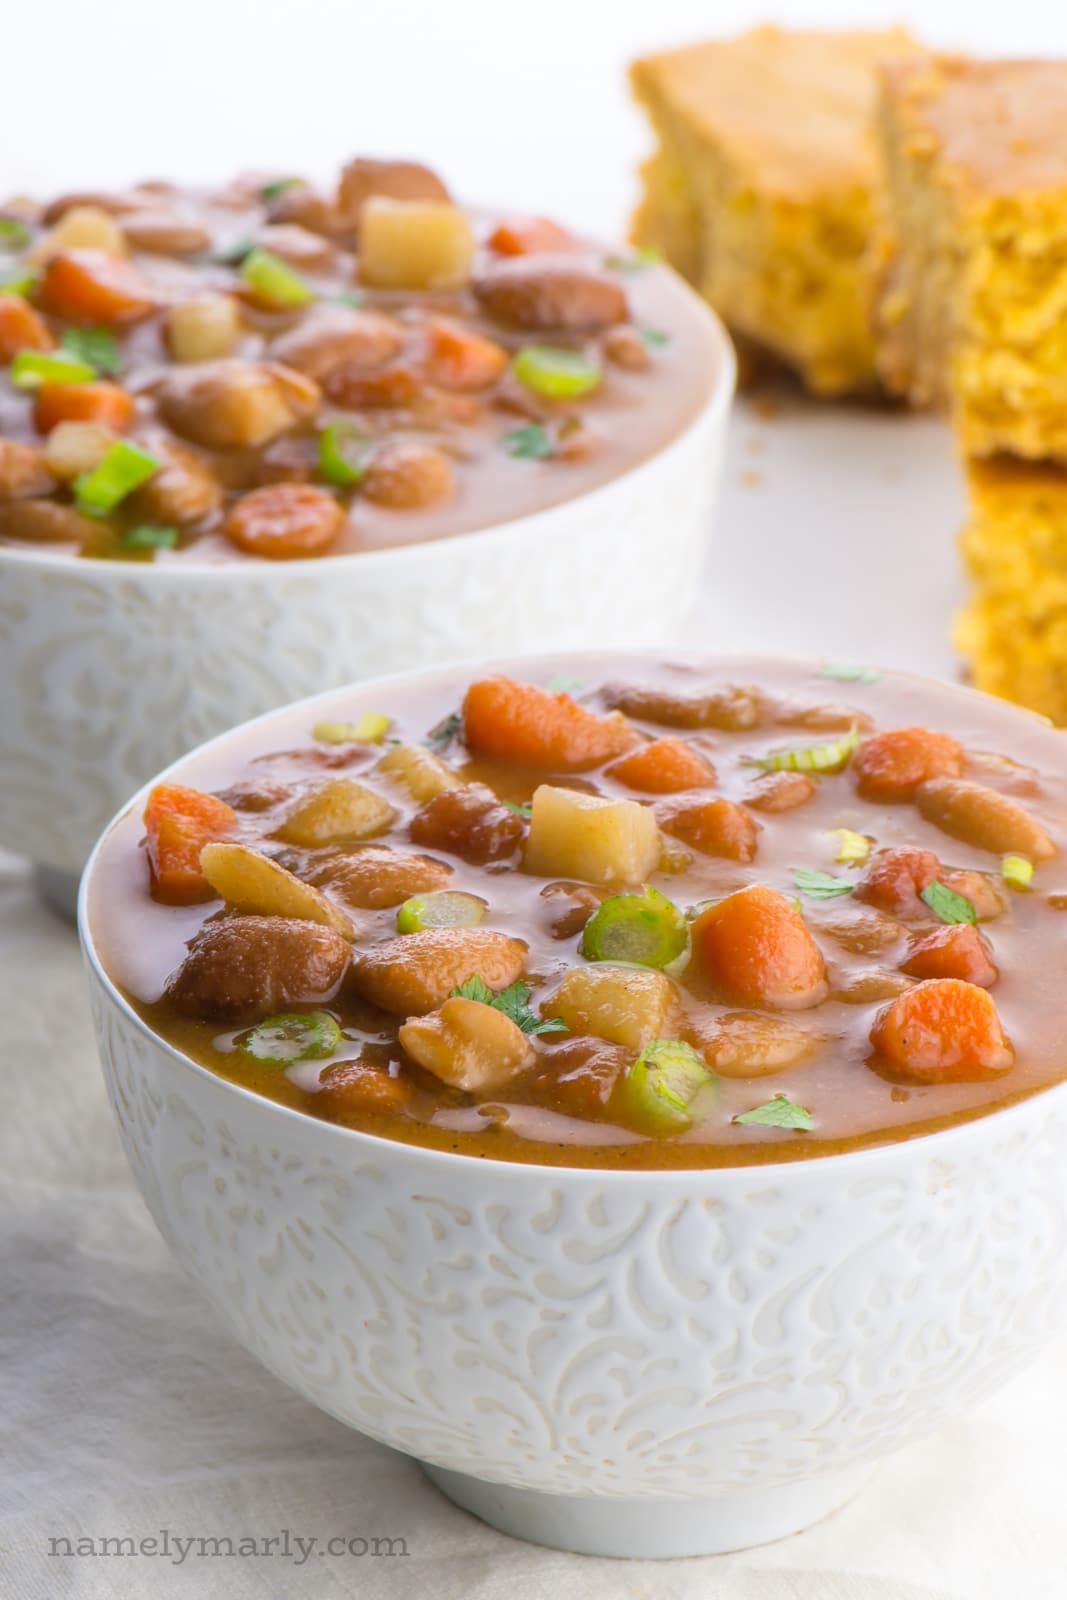 Two bowls of vegan pinto bean soup sit one in front of the other. The bowls are full of carrots, potatoes, green onions, and pinto beans. On the side are slices of cornbread.